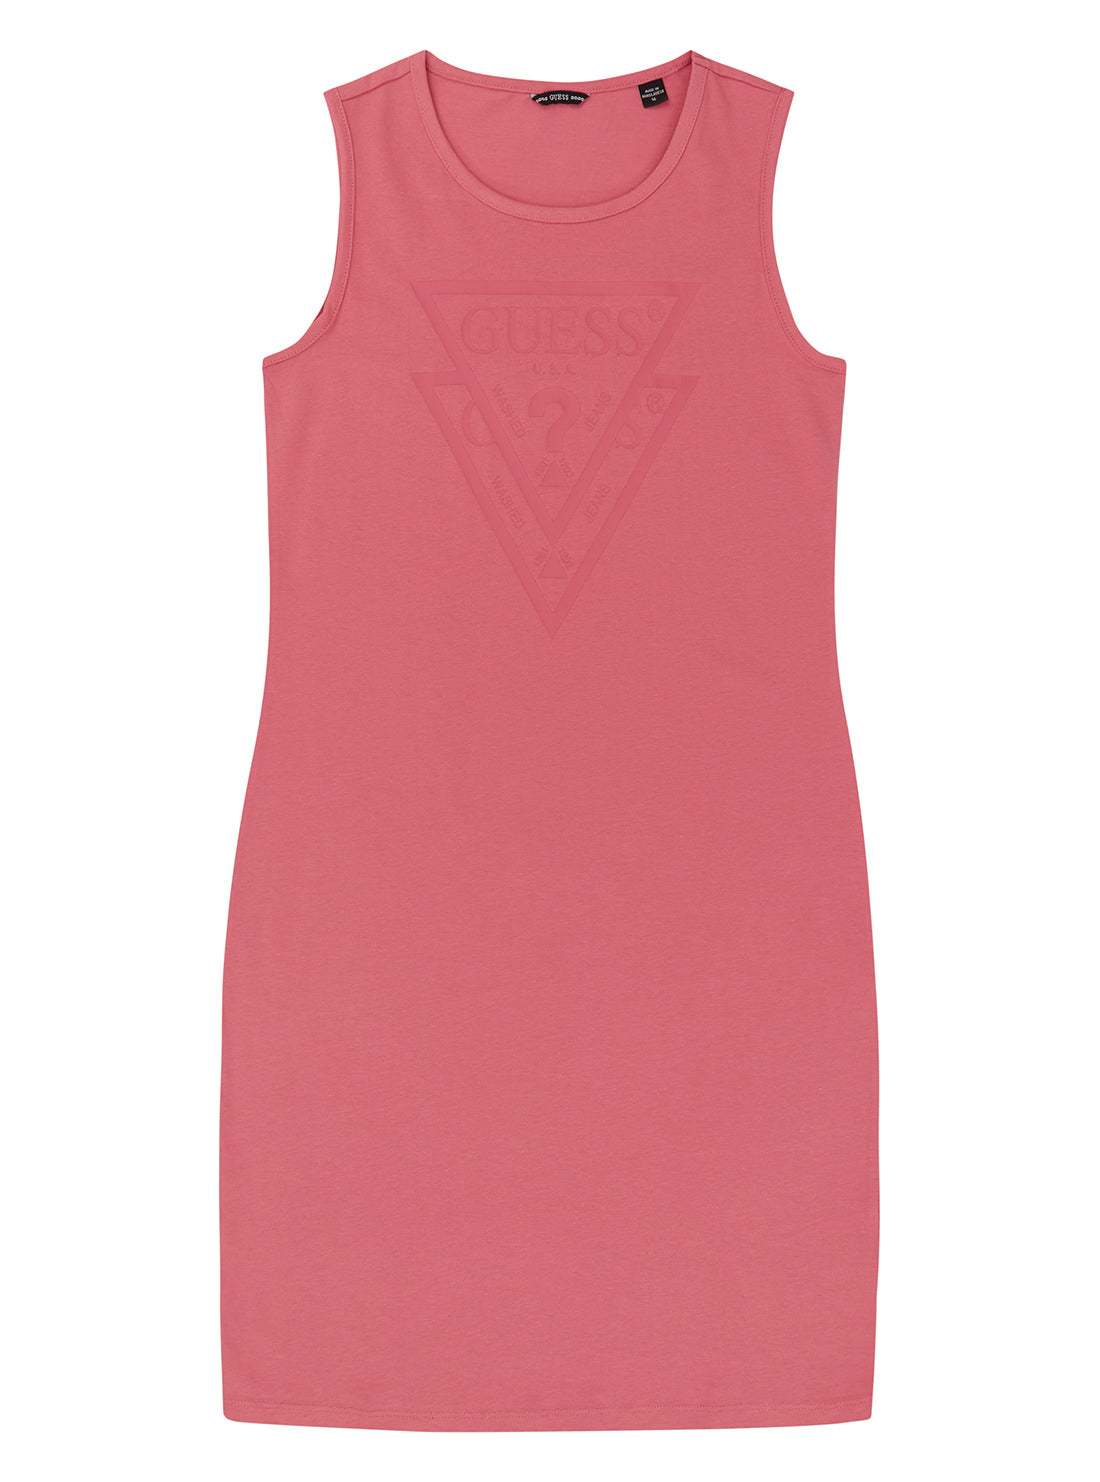 Girl's Pink Logo Staple Dress (7-16) | GUESS Kids | front view